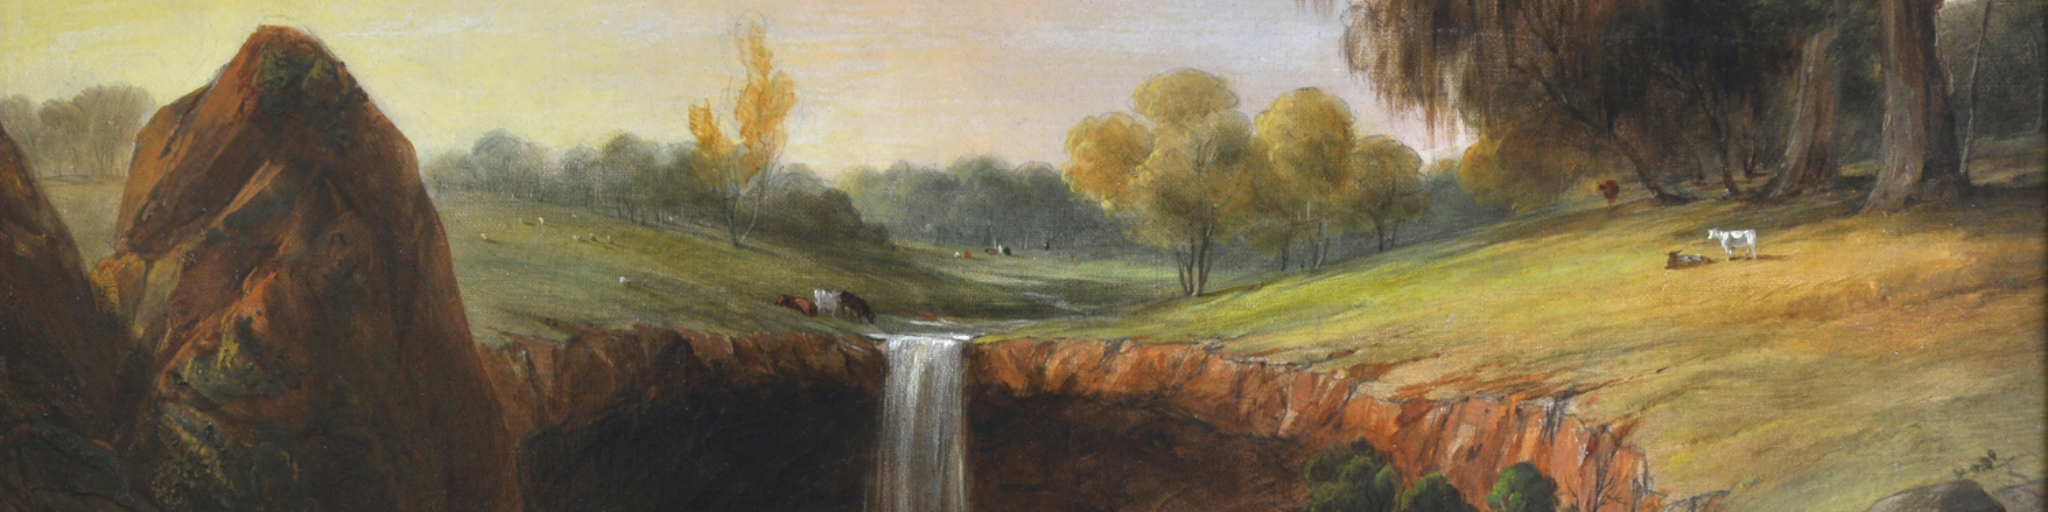 THOMAS CLARK The Wannon Falls, c.1860 oil on canvas on board. Purchased by the Hamilton Gallery Trust Fund, with additional support from Geoff Handbury AO & Helen Handbury AO 2003.